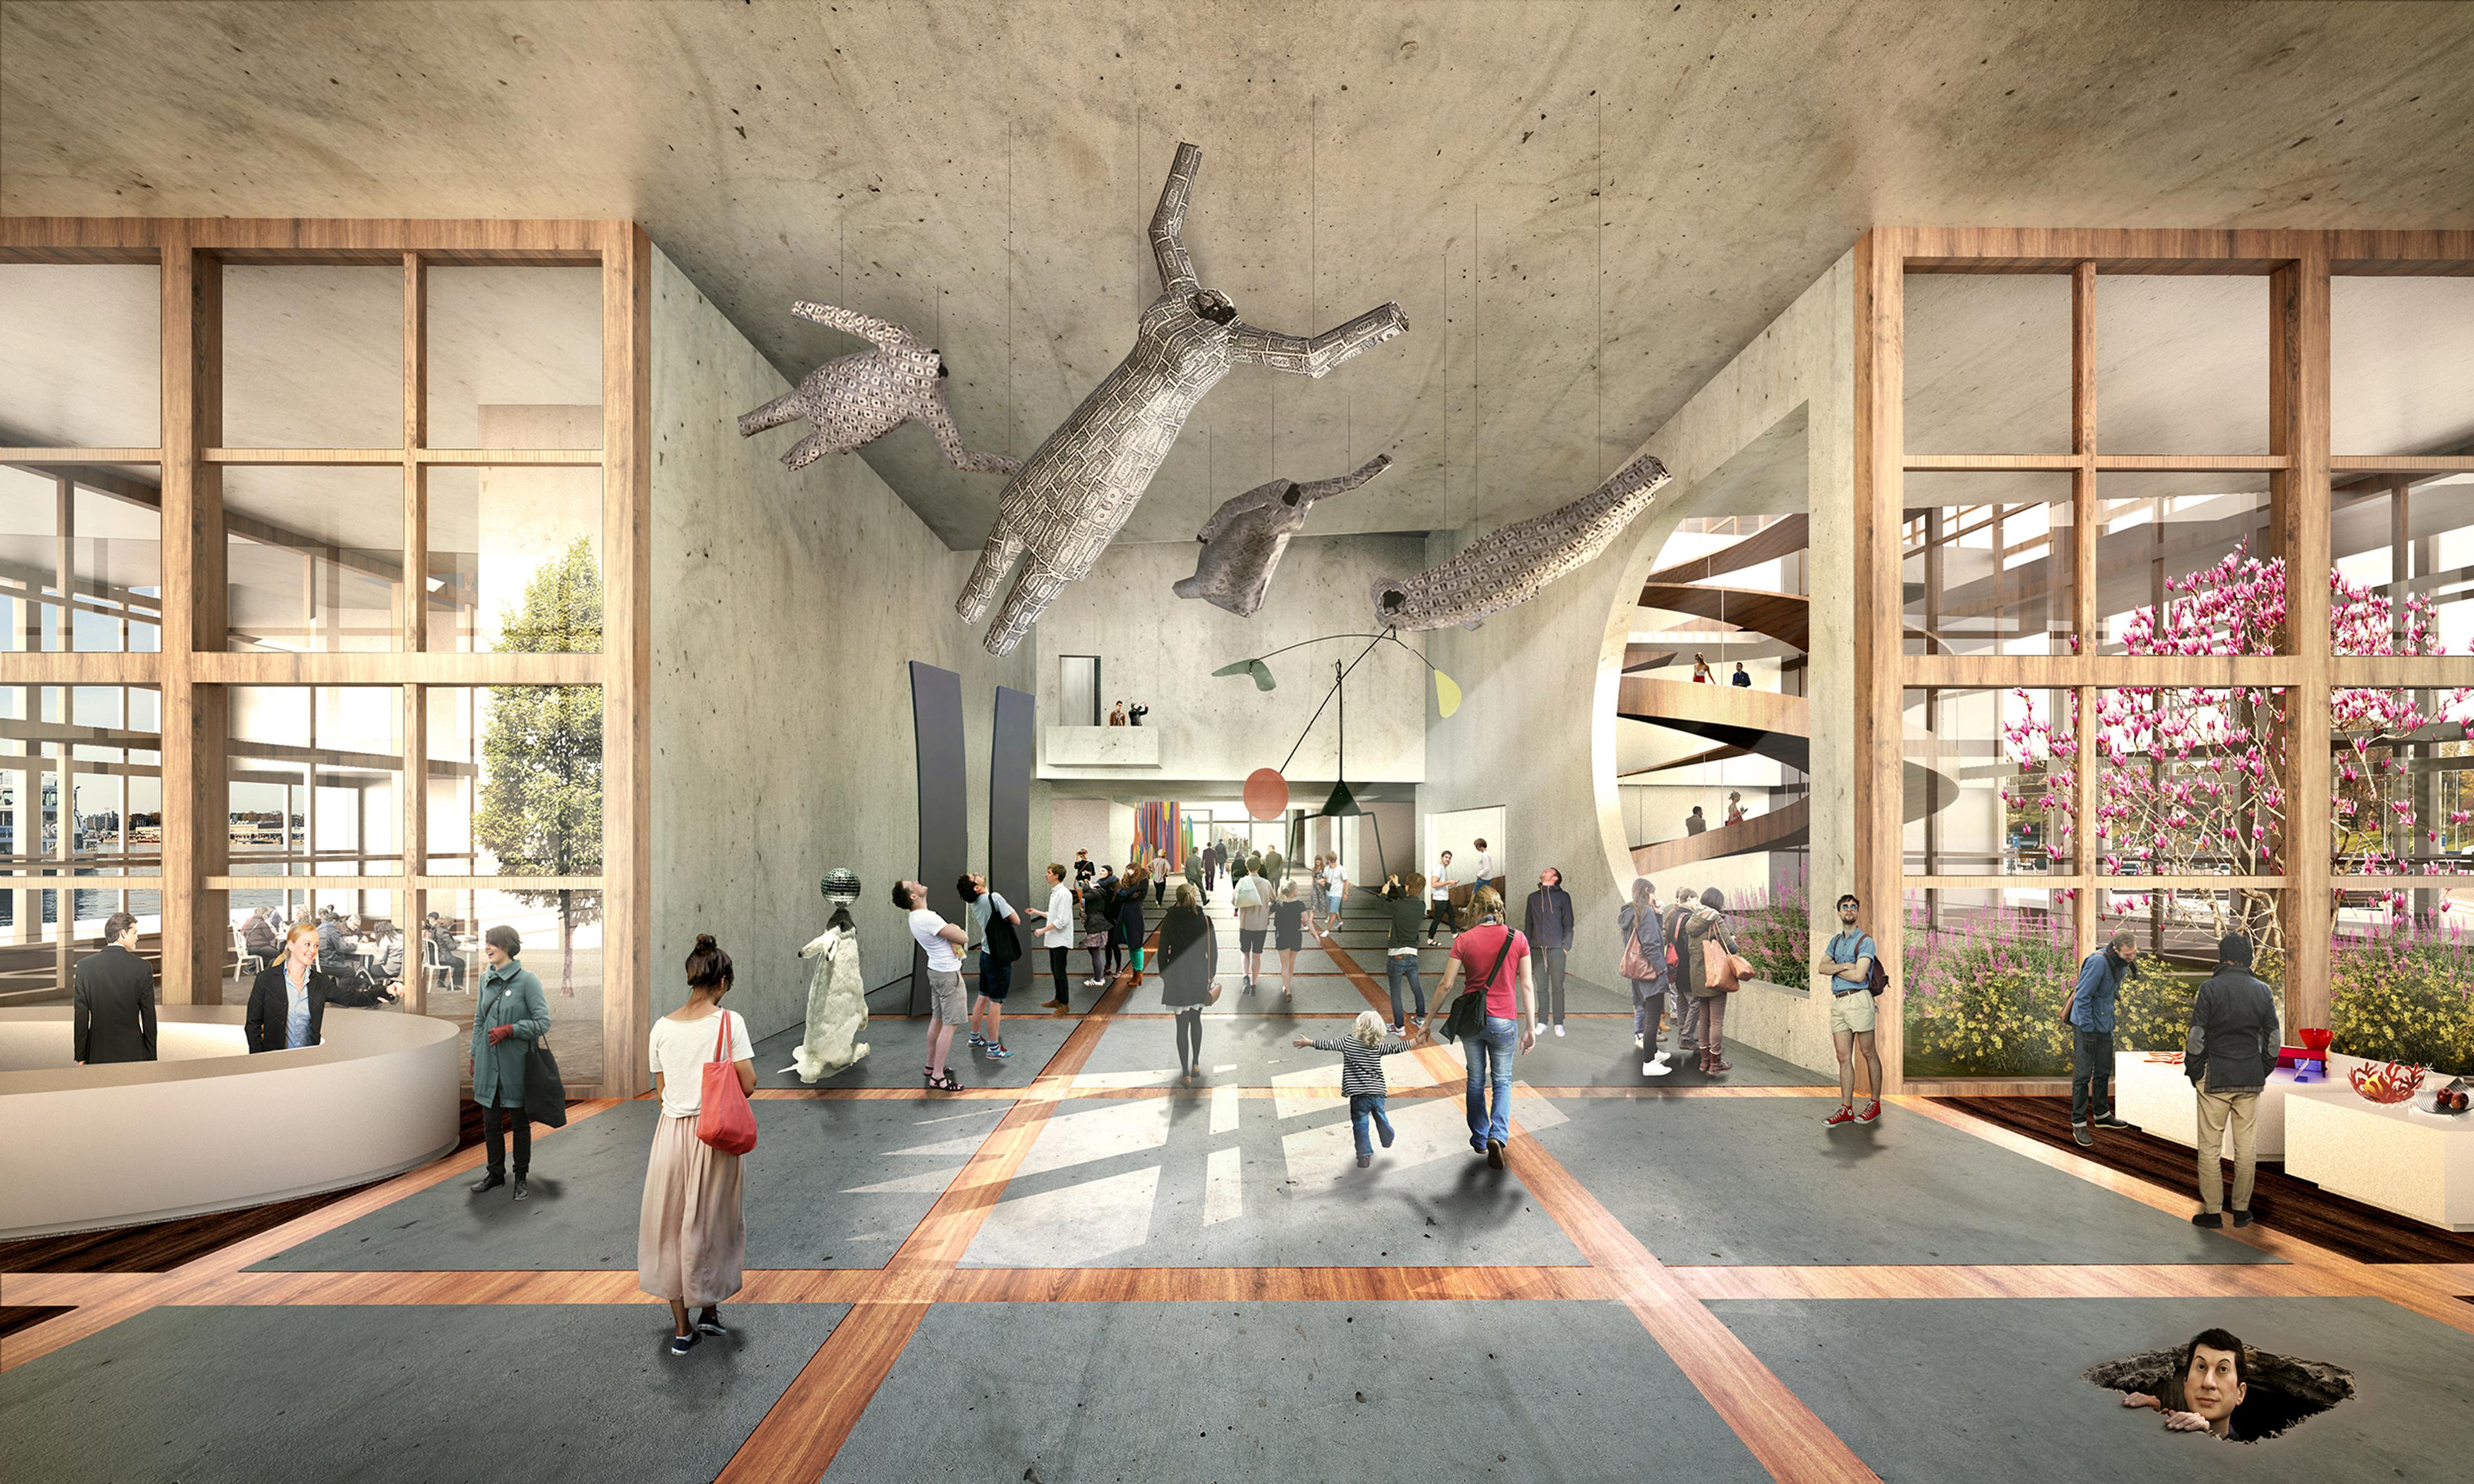 Architectural rendering of a museum structure inside with people and art